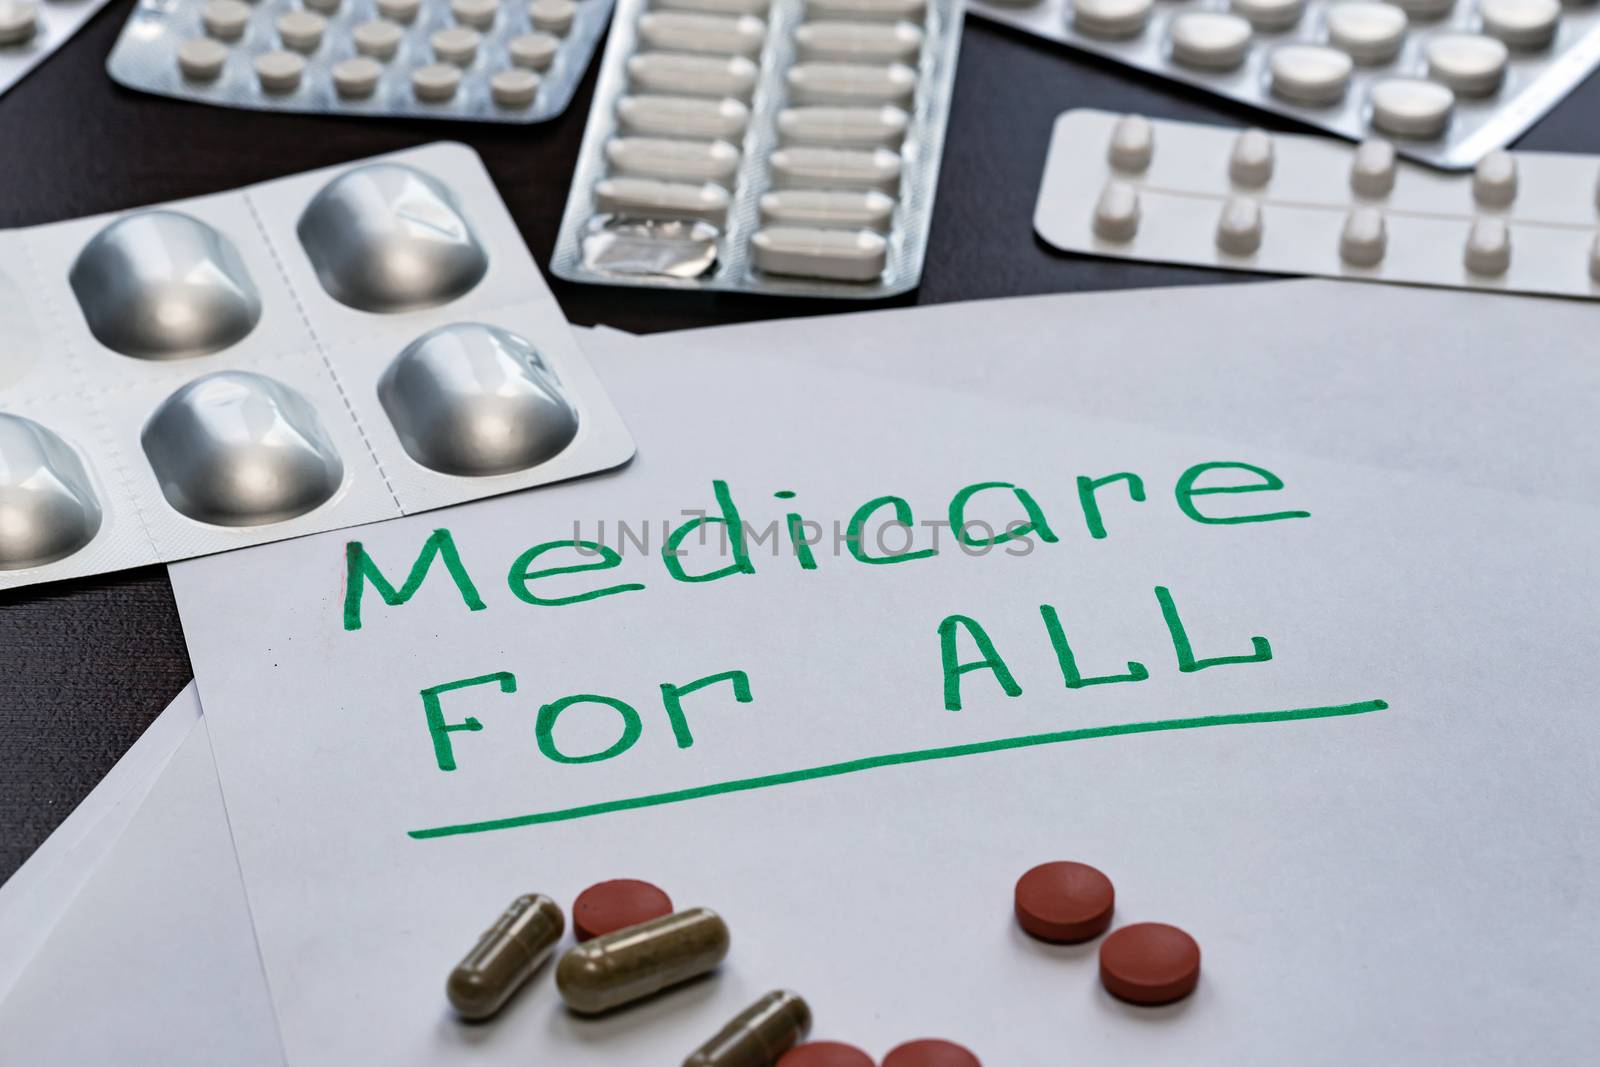 The Medicare for all sign is written on the sheet in green letters, by bonilook